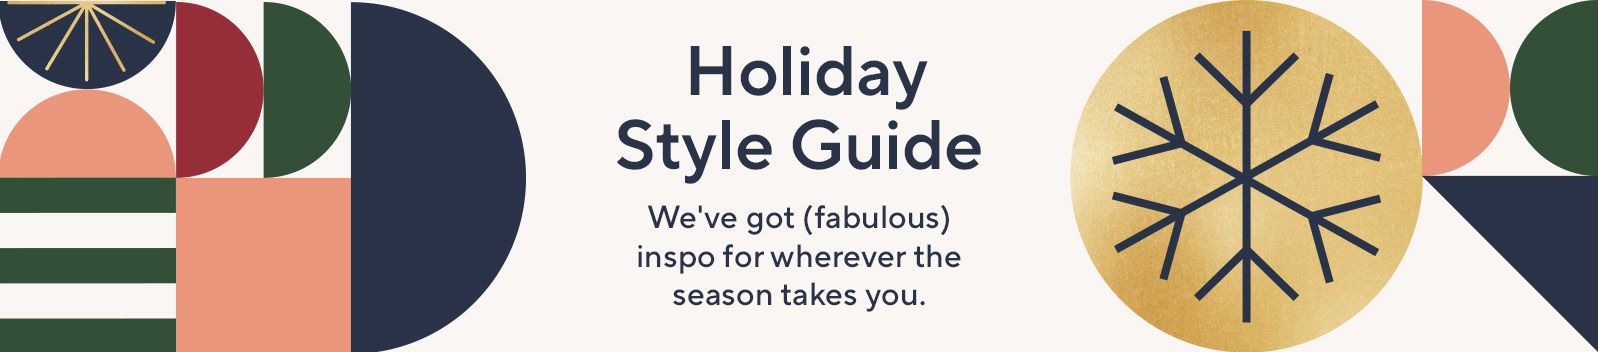 Holiday Style Guide. We've got (fabulous) inspo for wherever the season takes you. 